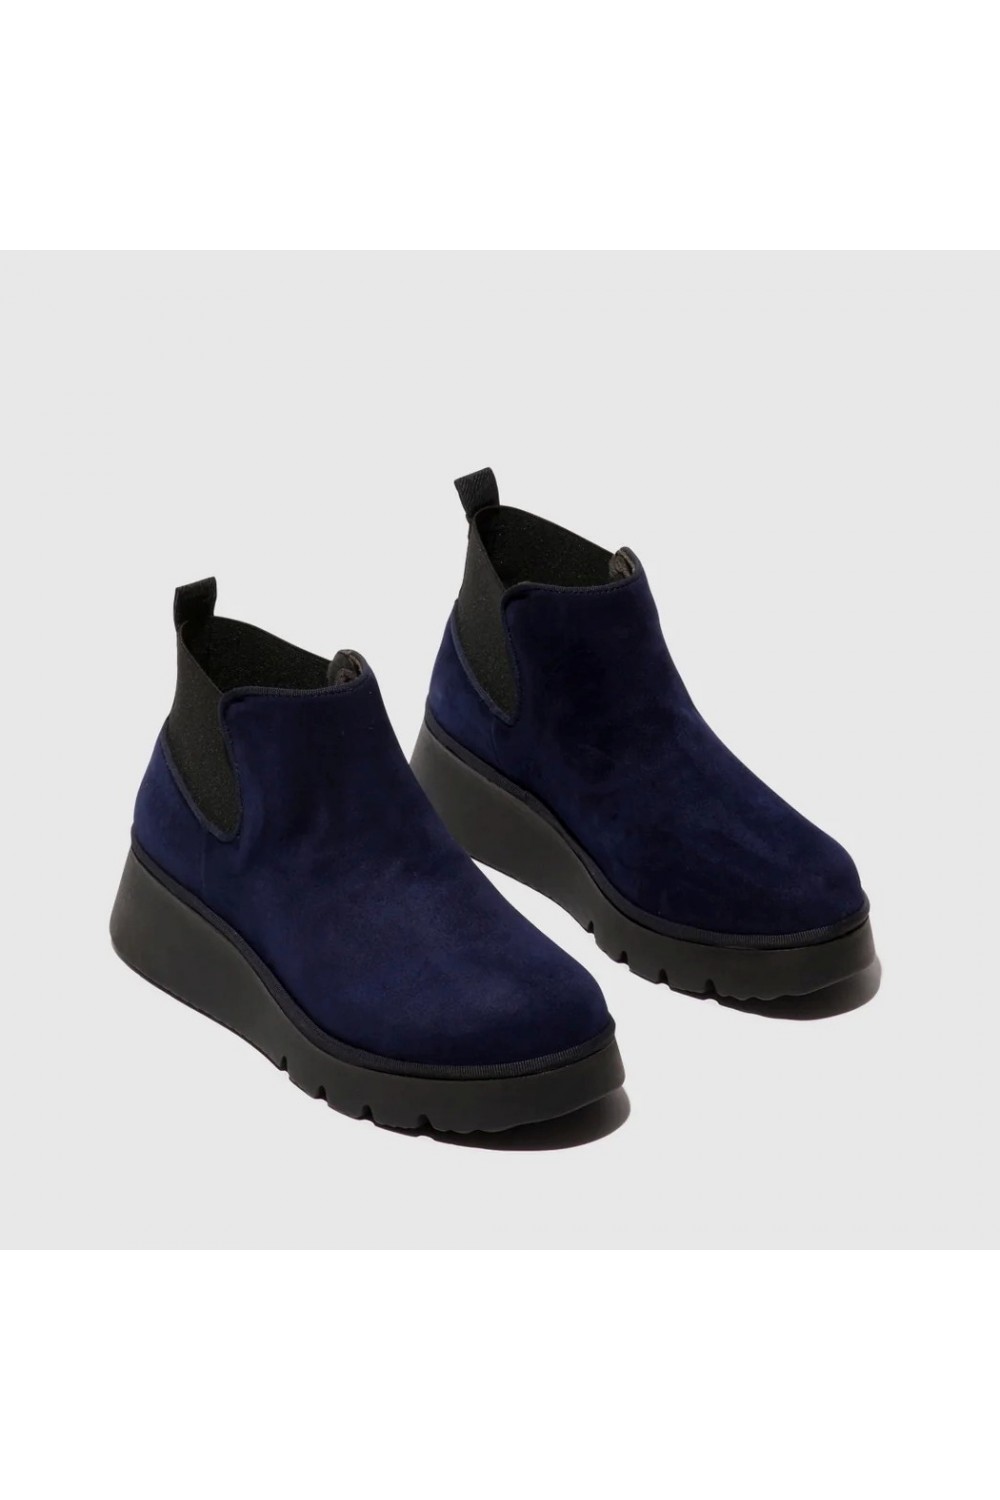 FLY LONDON Pada403 Pull On Ankle Boot Kid Suede Navy